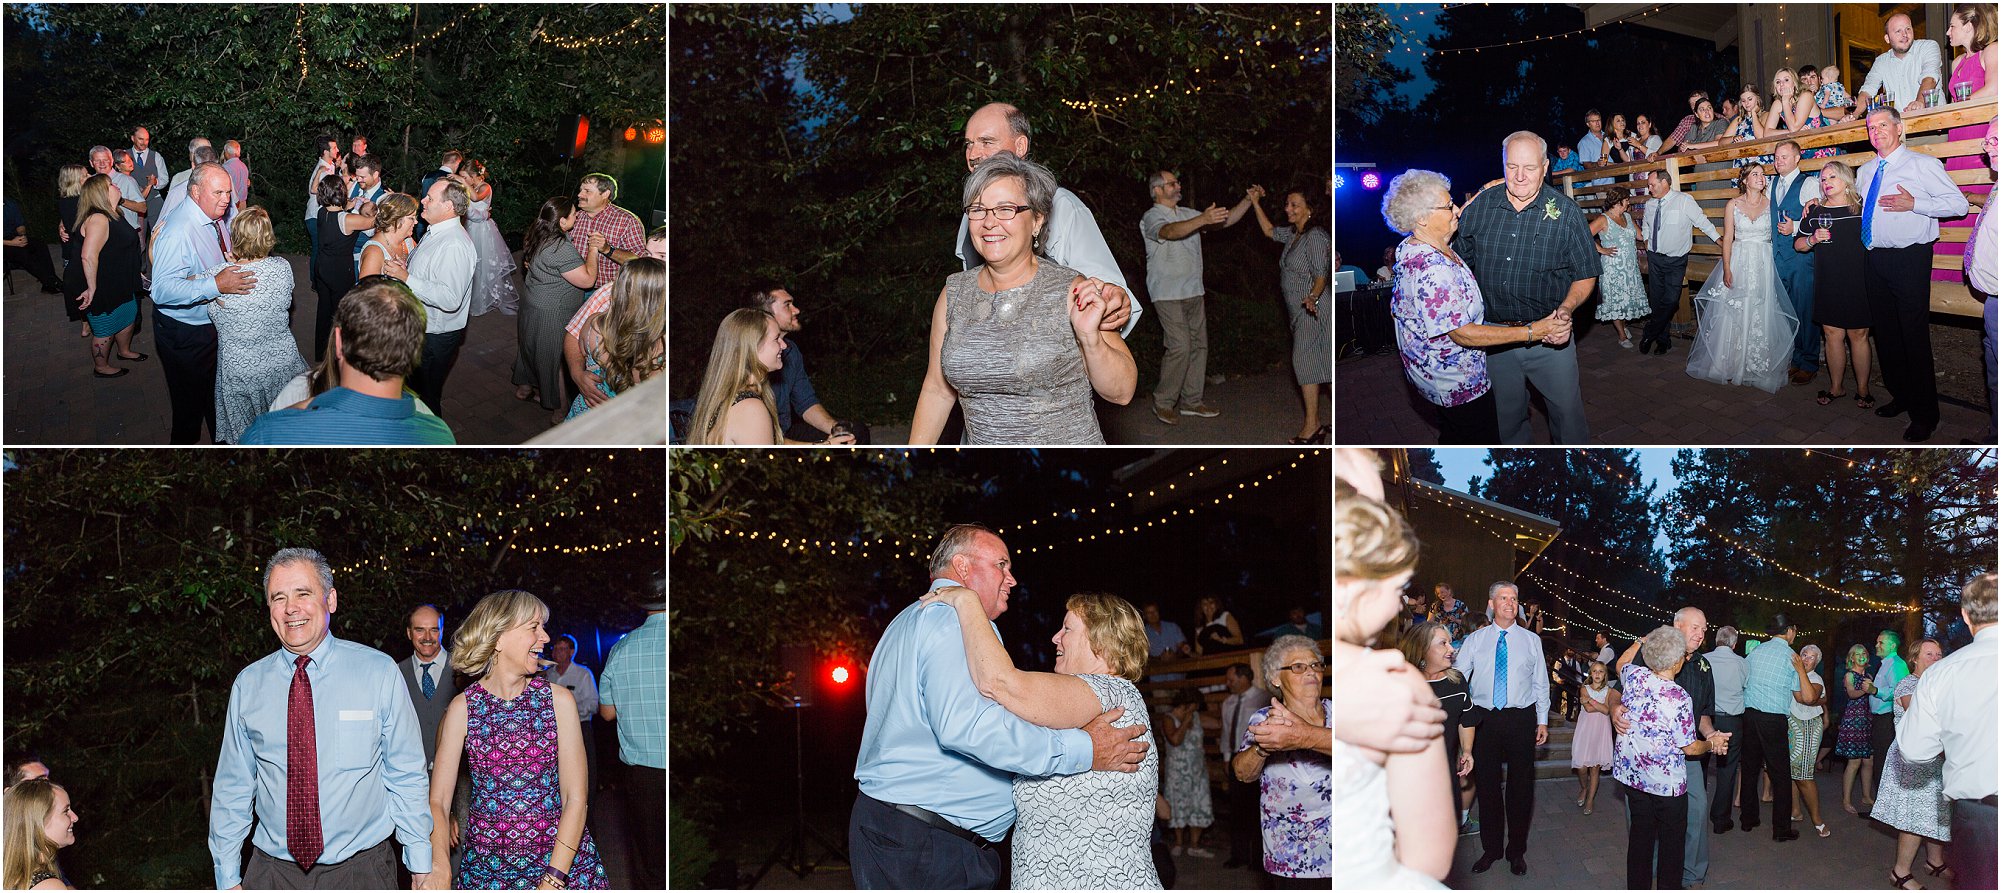 A special dance for all the married couples, with the longest married remaining on the dance floor was done at this Bend, OR wedding photographed by Erica Swantek Photography. 